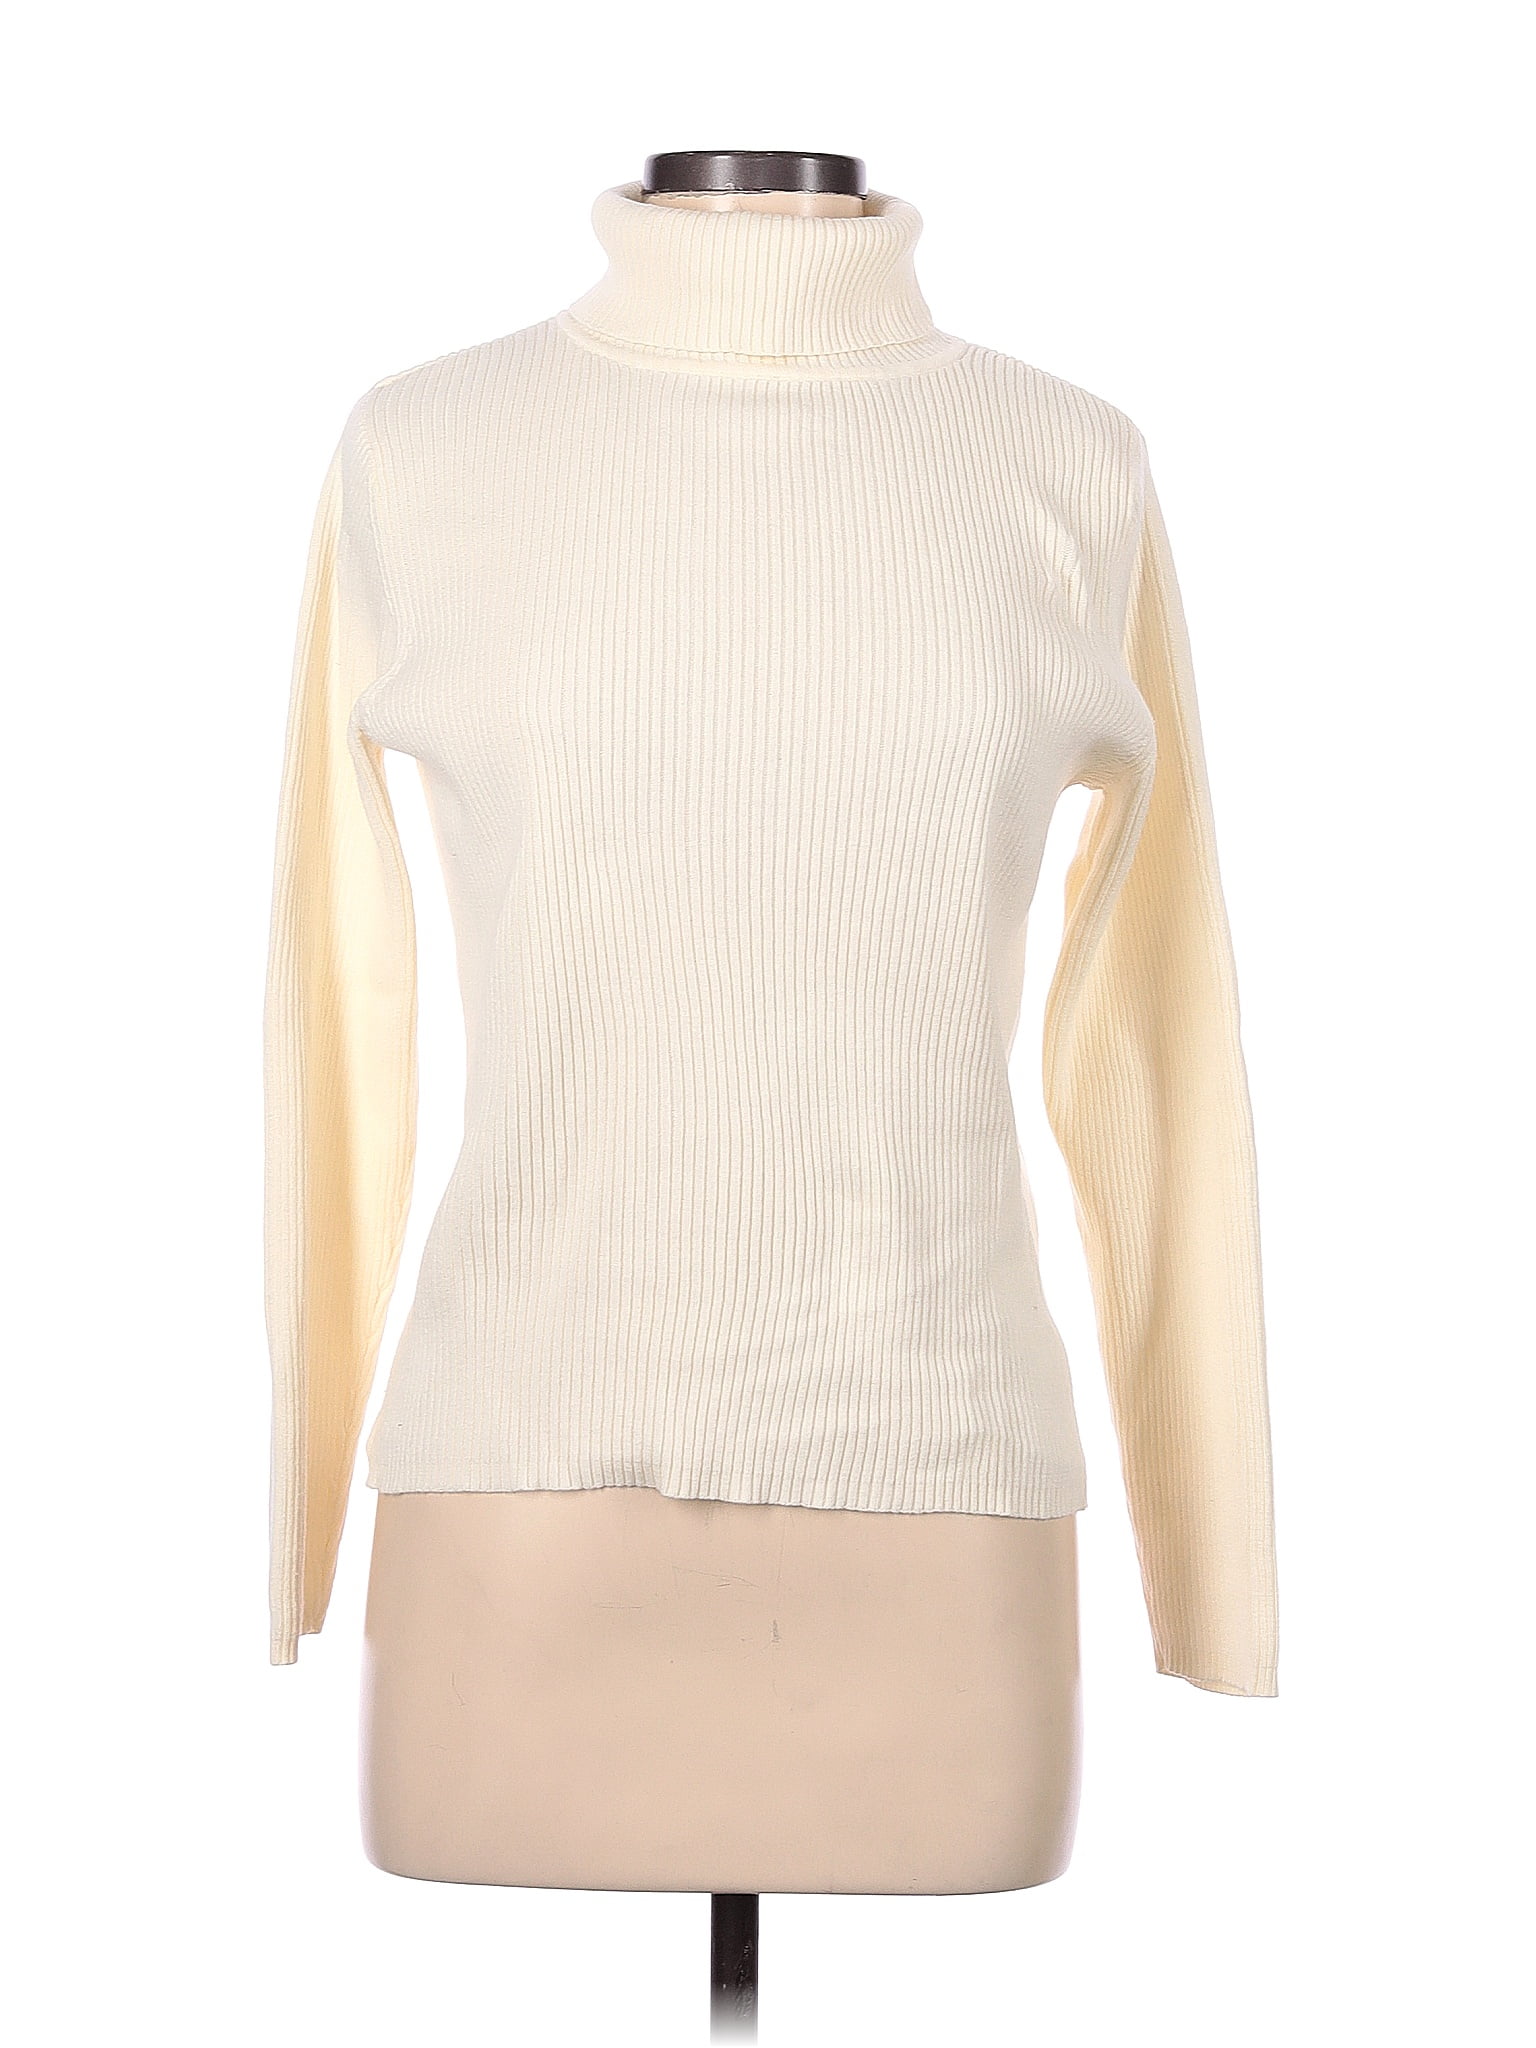 Kim Rogers Color Block Solid Ivory Turtleneck Sweater Size M - 44% off ...